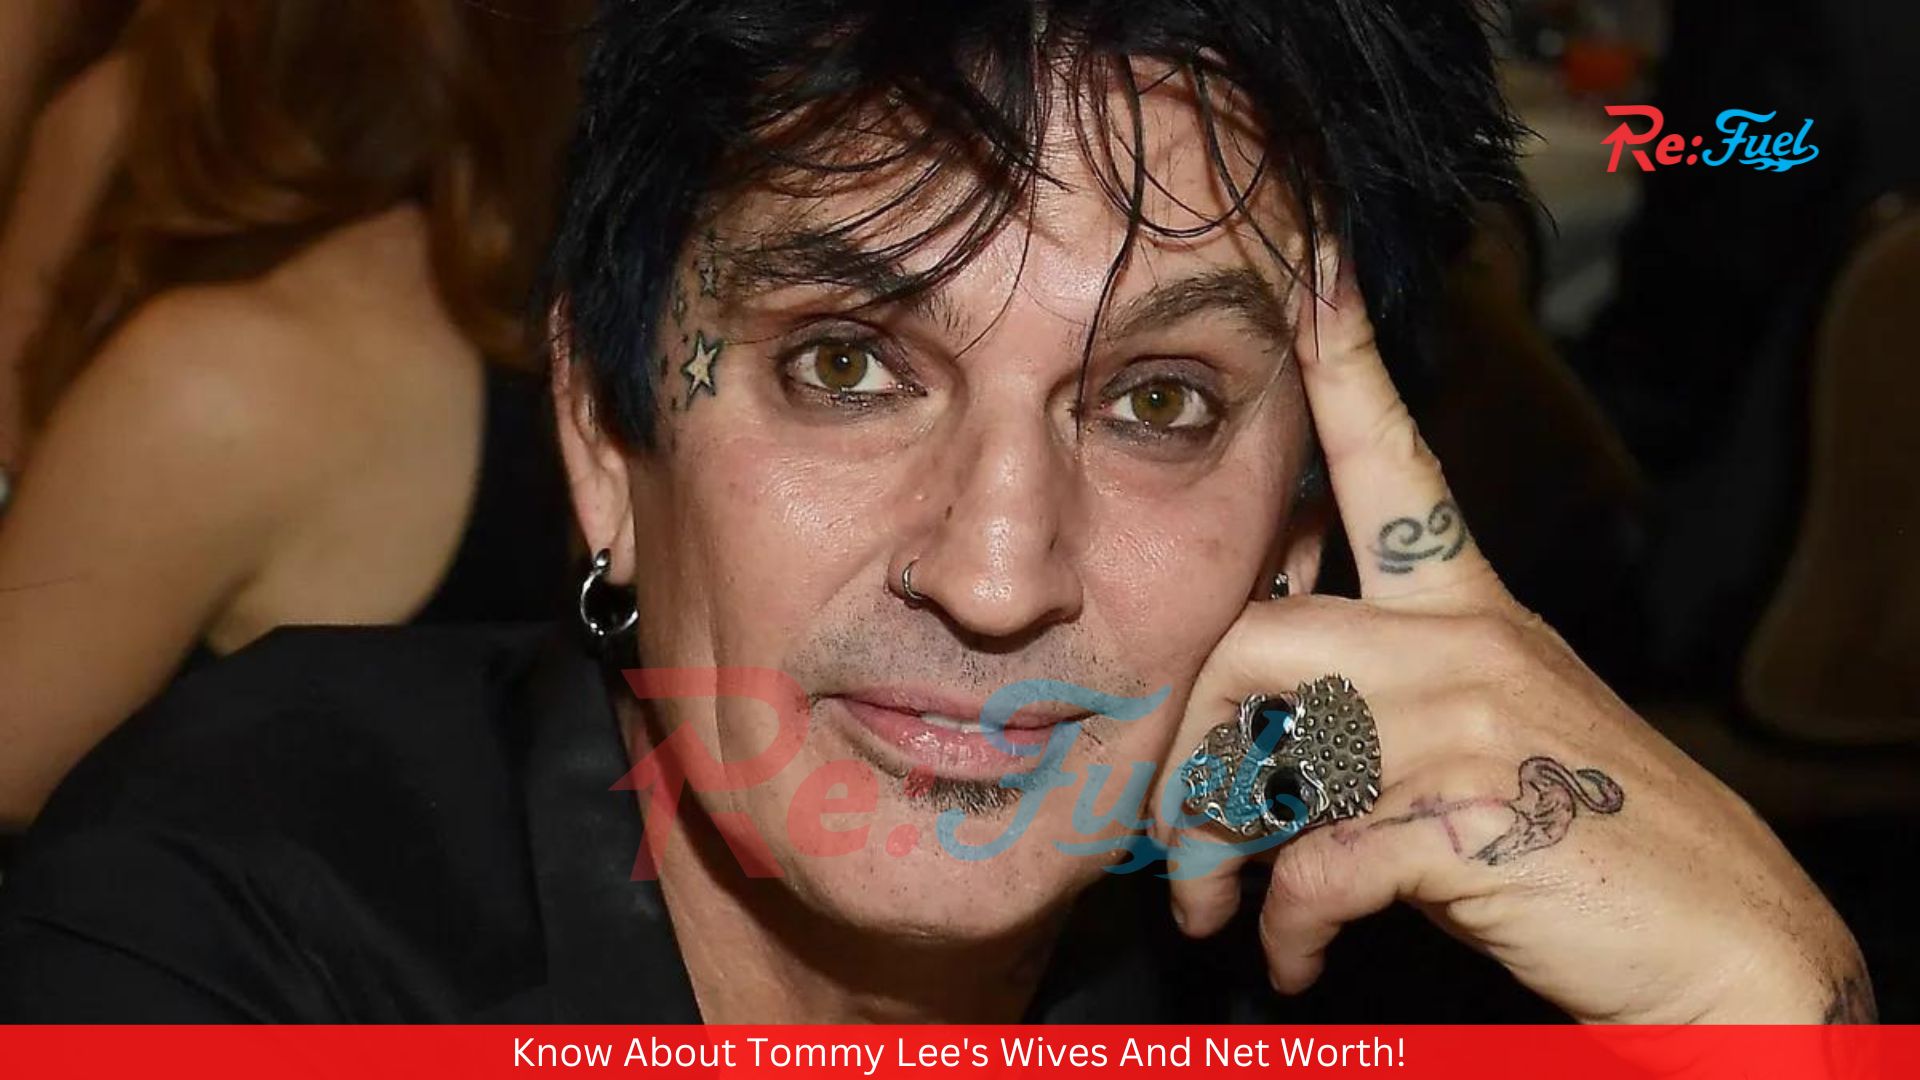 Know About Tommy Lee's Wives And Net Worth!